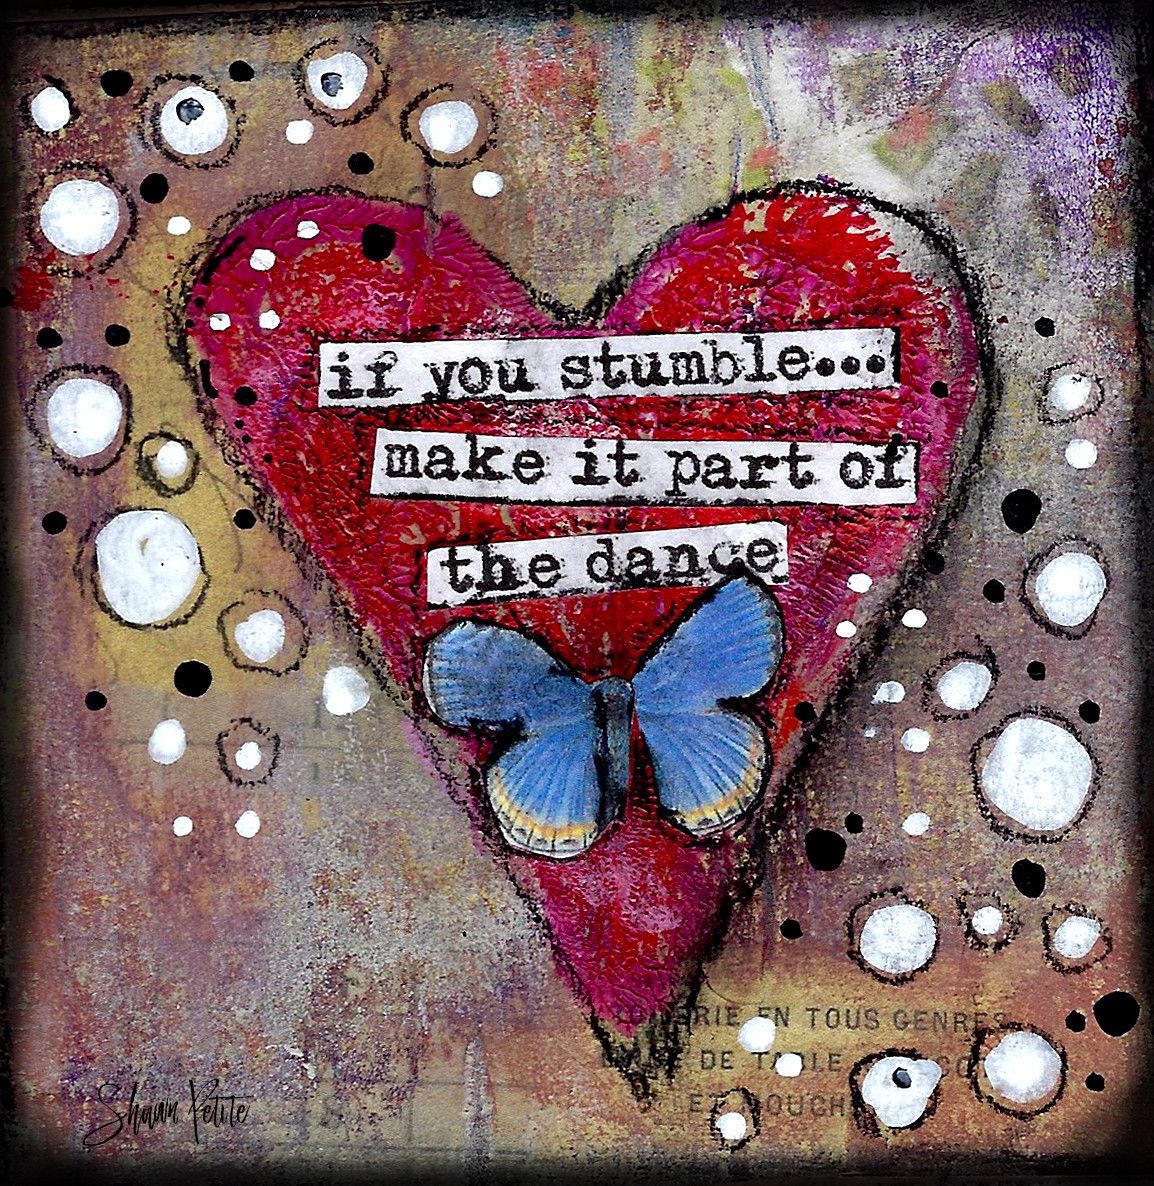 Giving hearts "If you stumble make it part of the Dance" 4x4